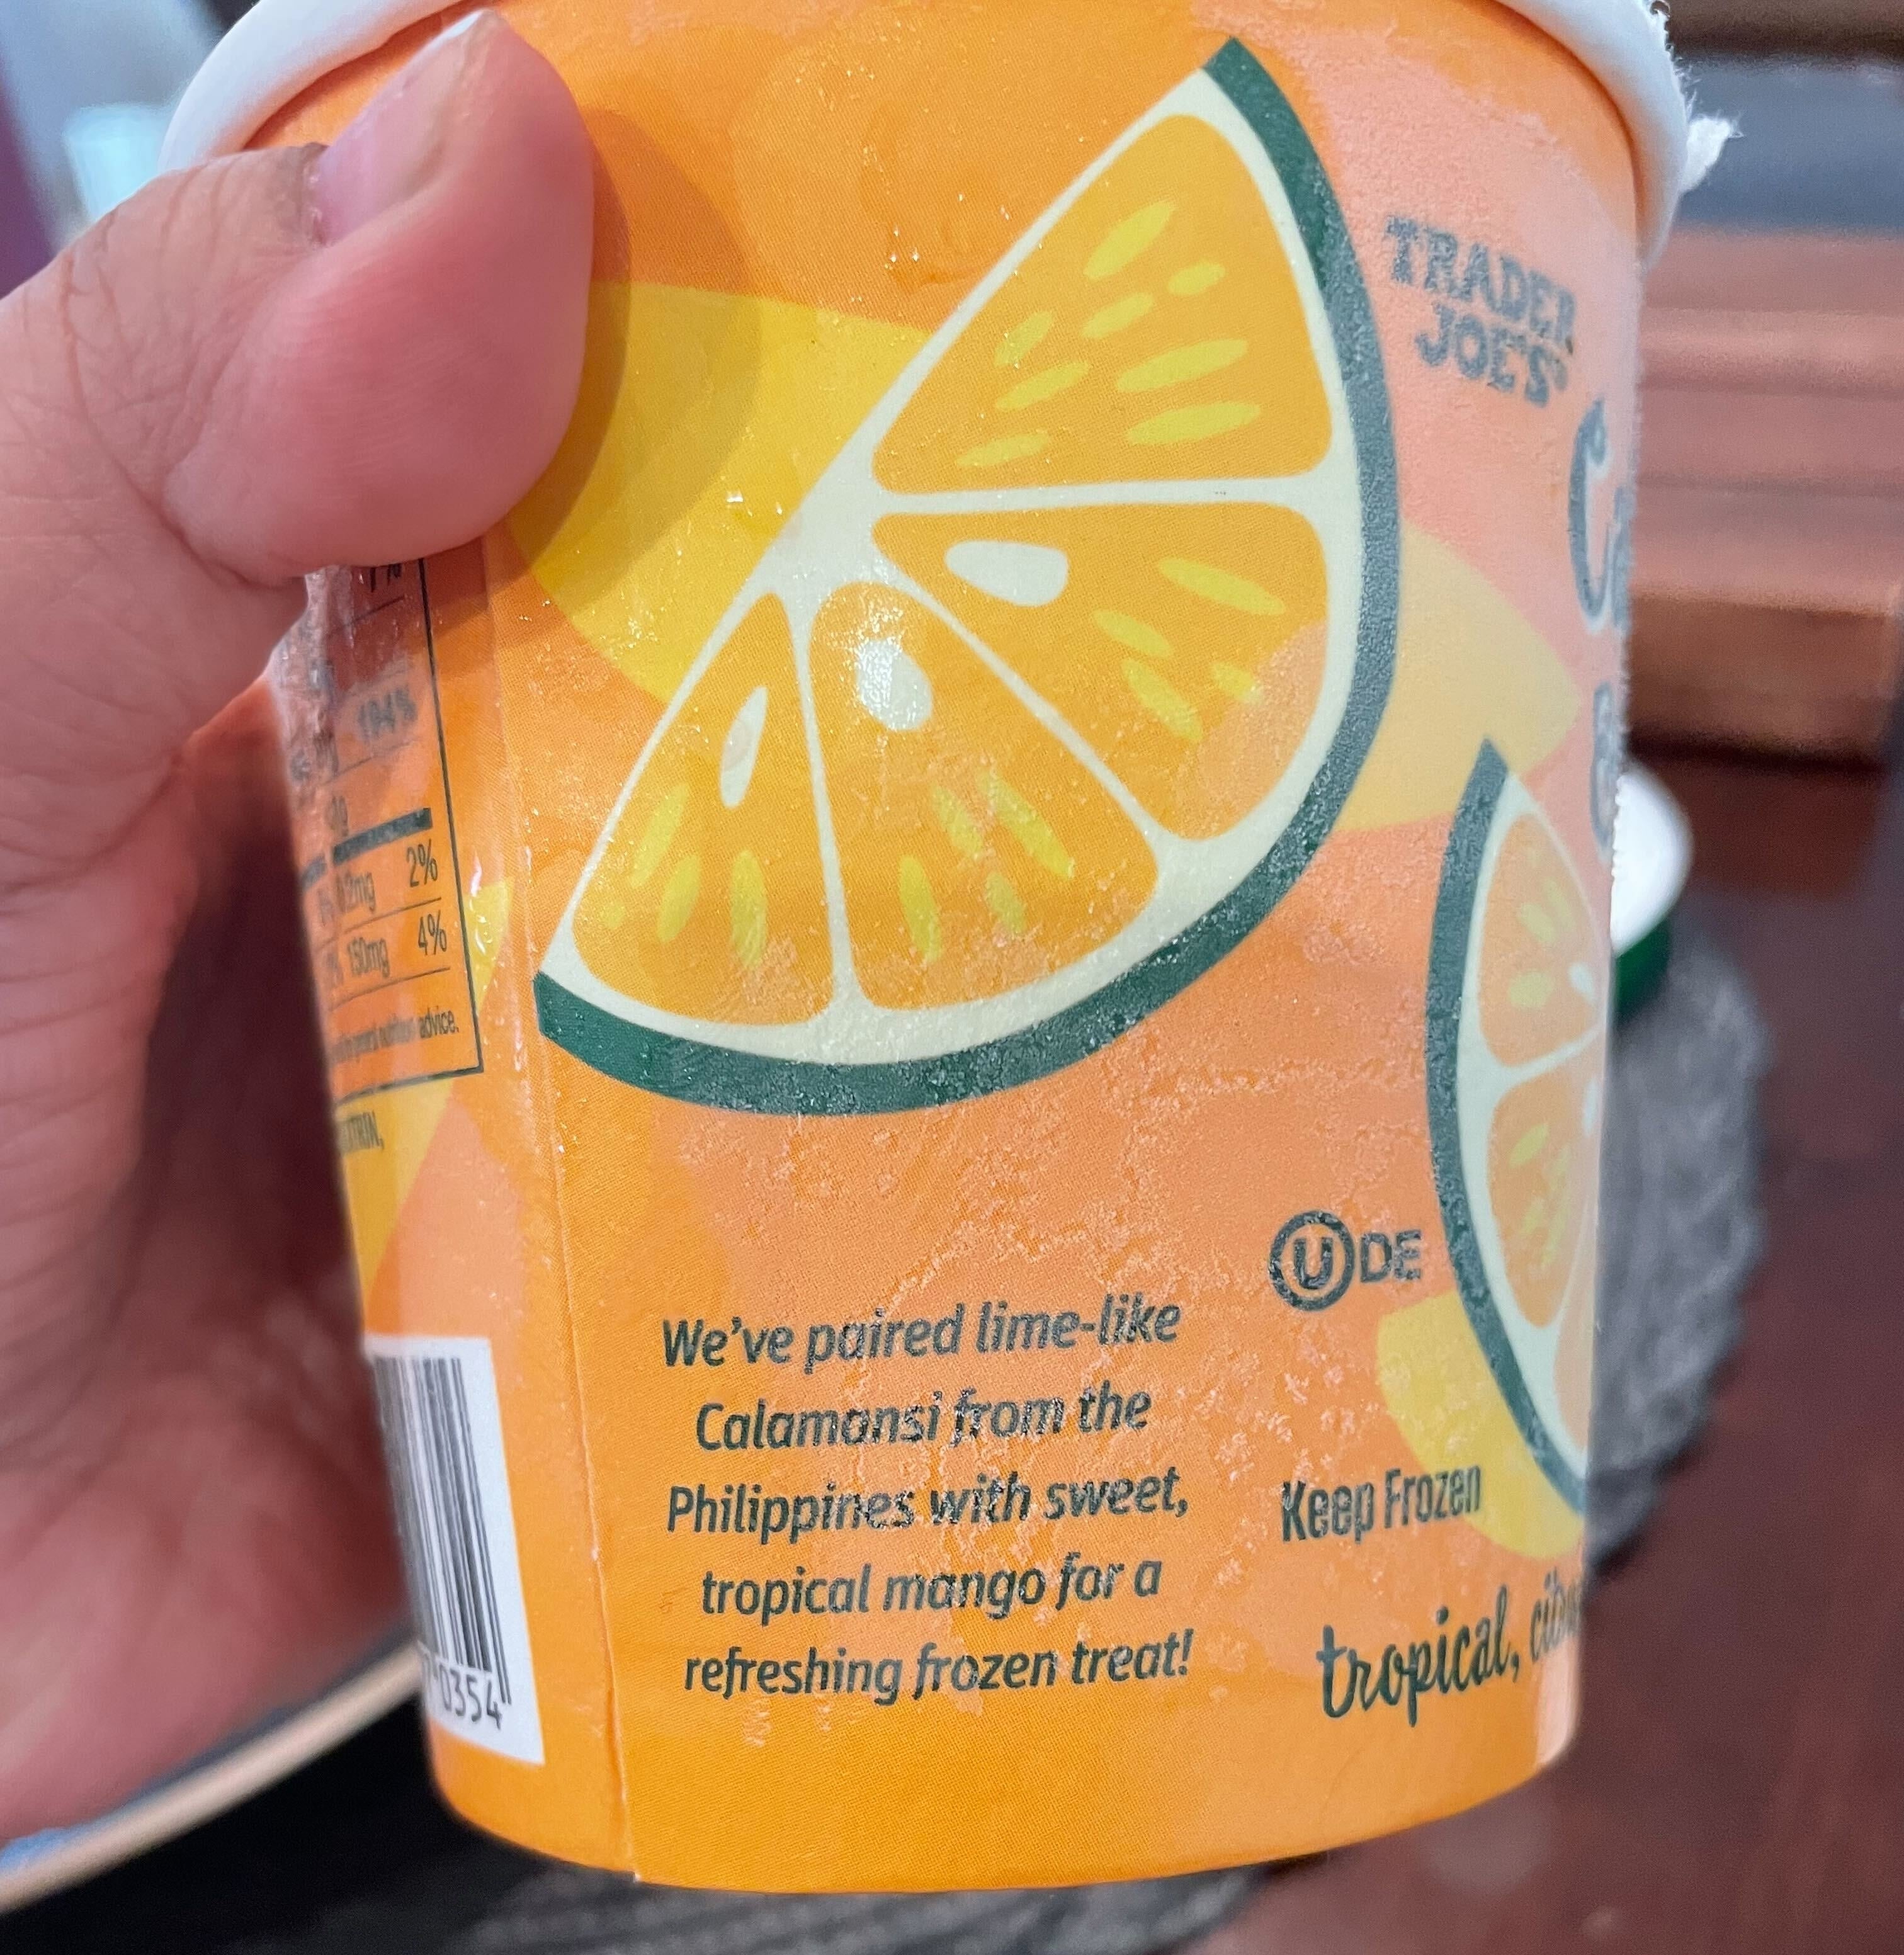 Hand holding a Trader Joe&#x27;s frozen treat with lime and calamansi fruit graphics. Text: &quot;We&#x27;ve paired lime-like Calamansi from the Philippines with sweet, tropical mango for a refreshing frozen treat!&quot;